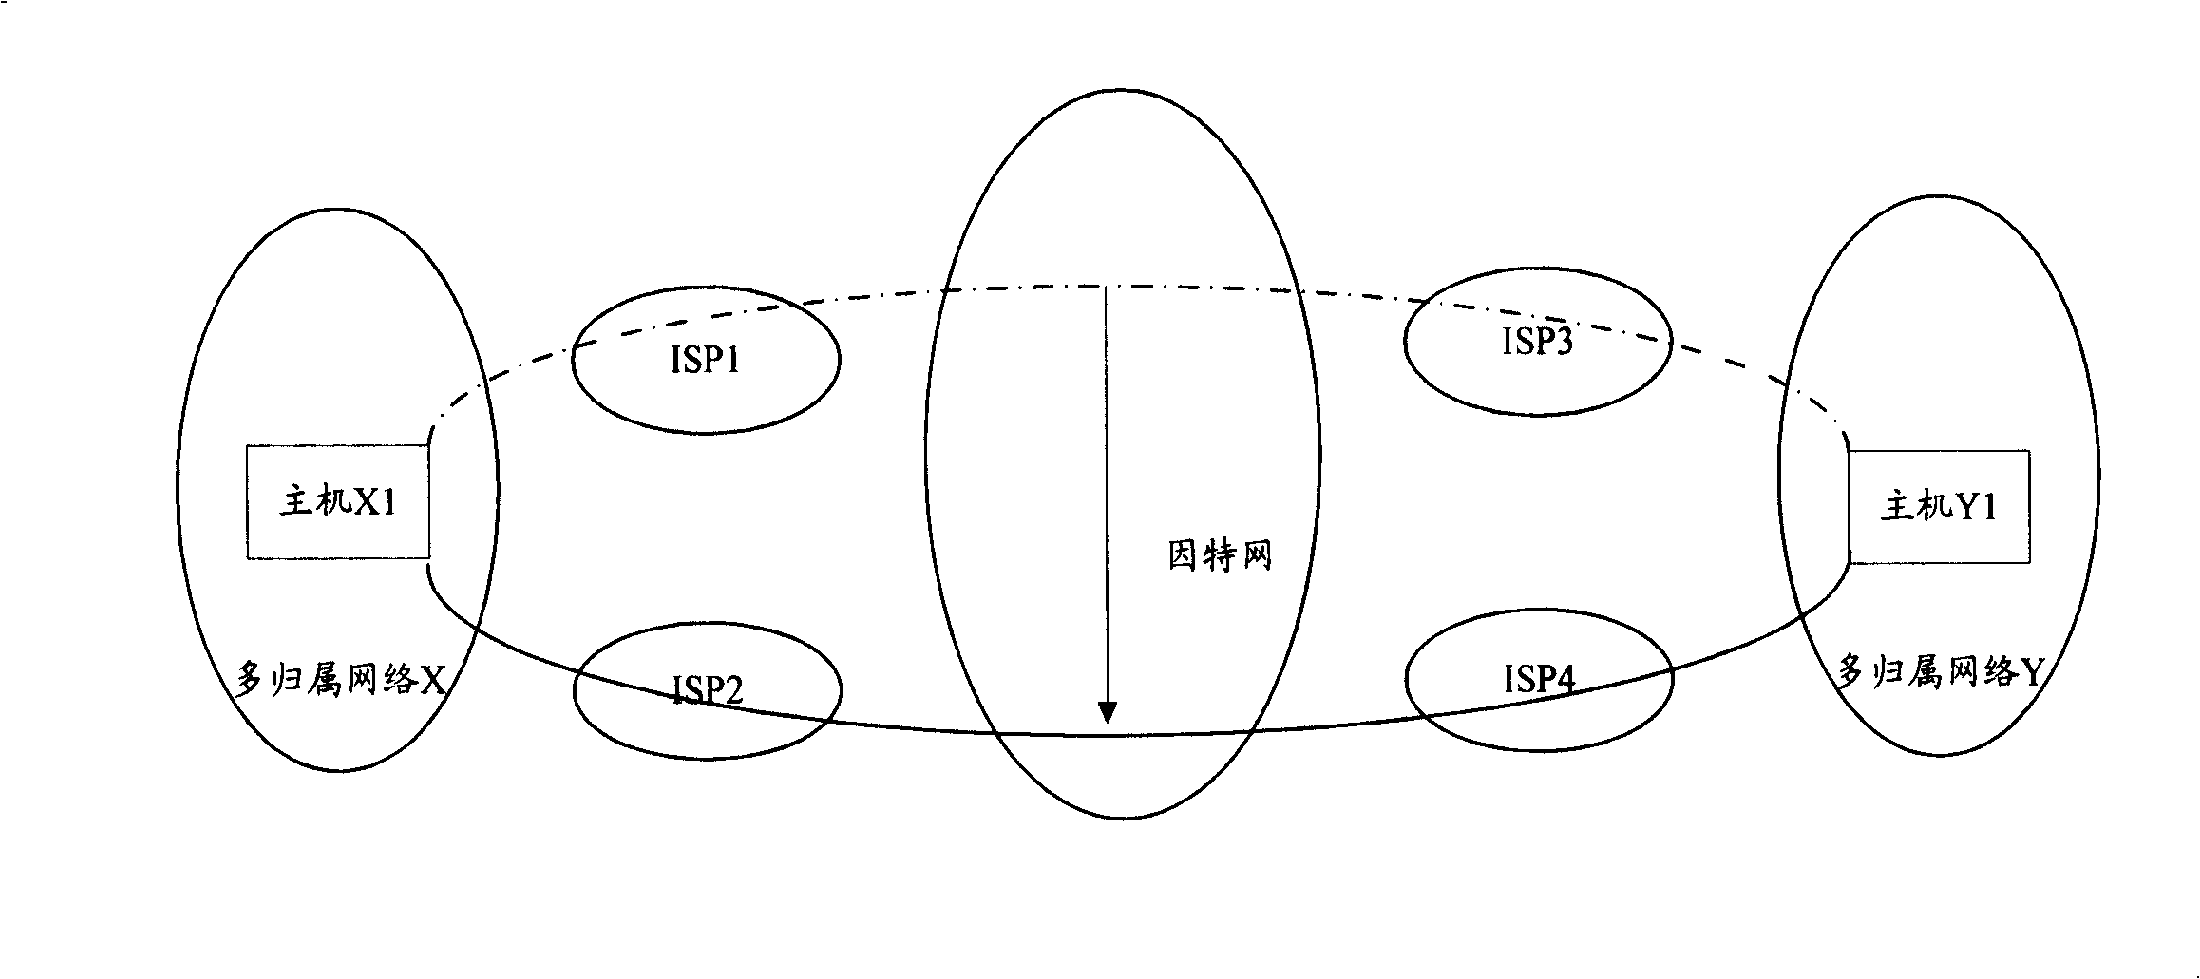 Multi-homing network system and method for implementing multi-homing network access